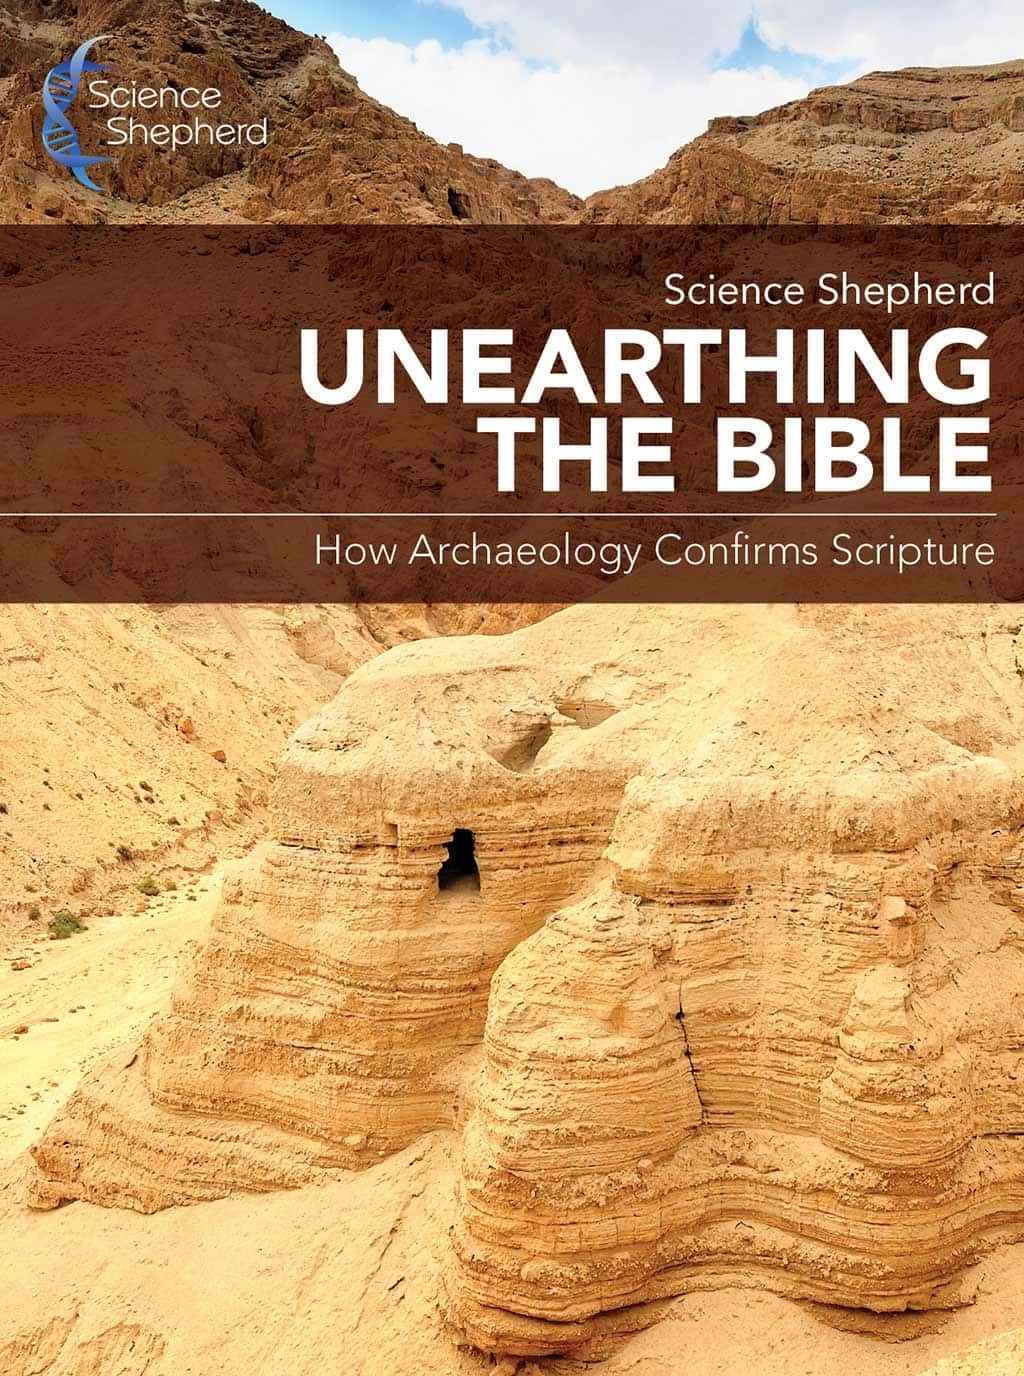 Unearthing the Bible online homeschool science archaeology course cover of cave in Qumran